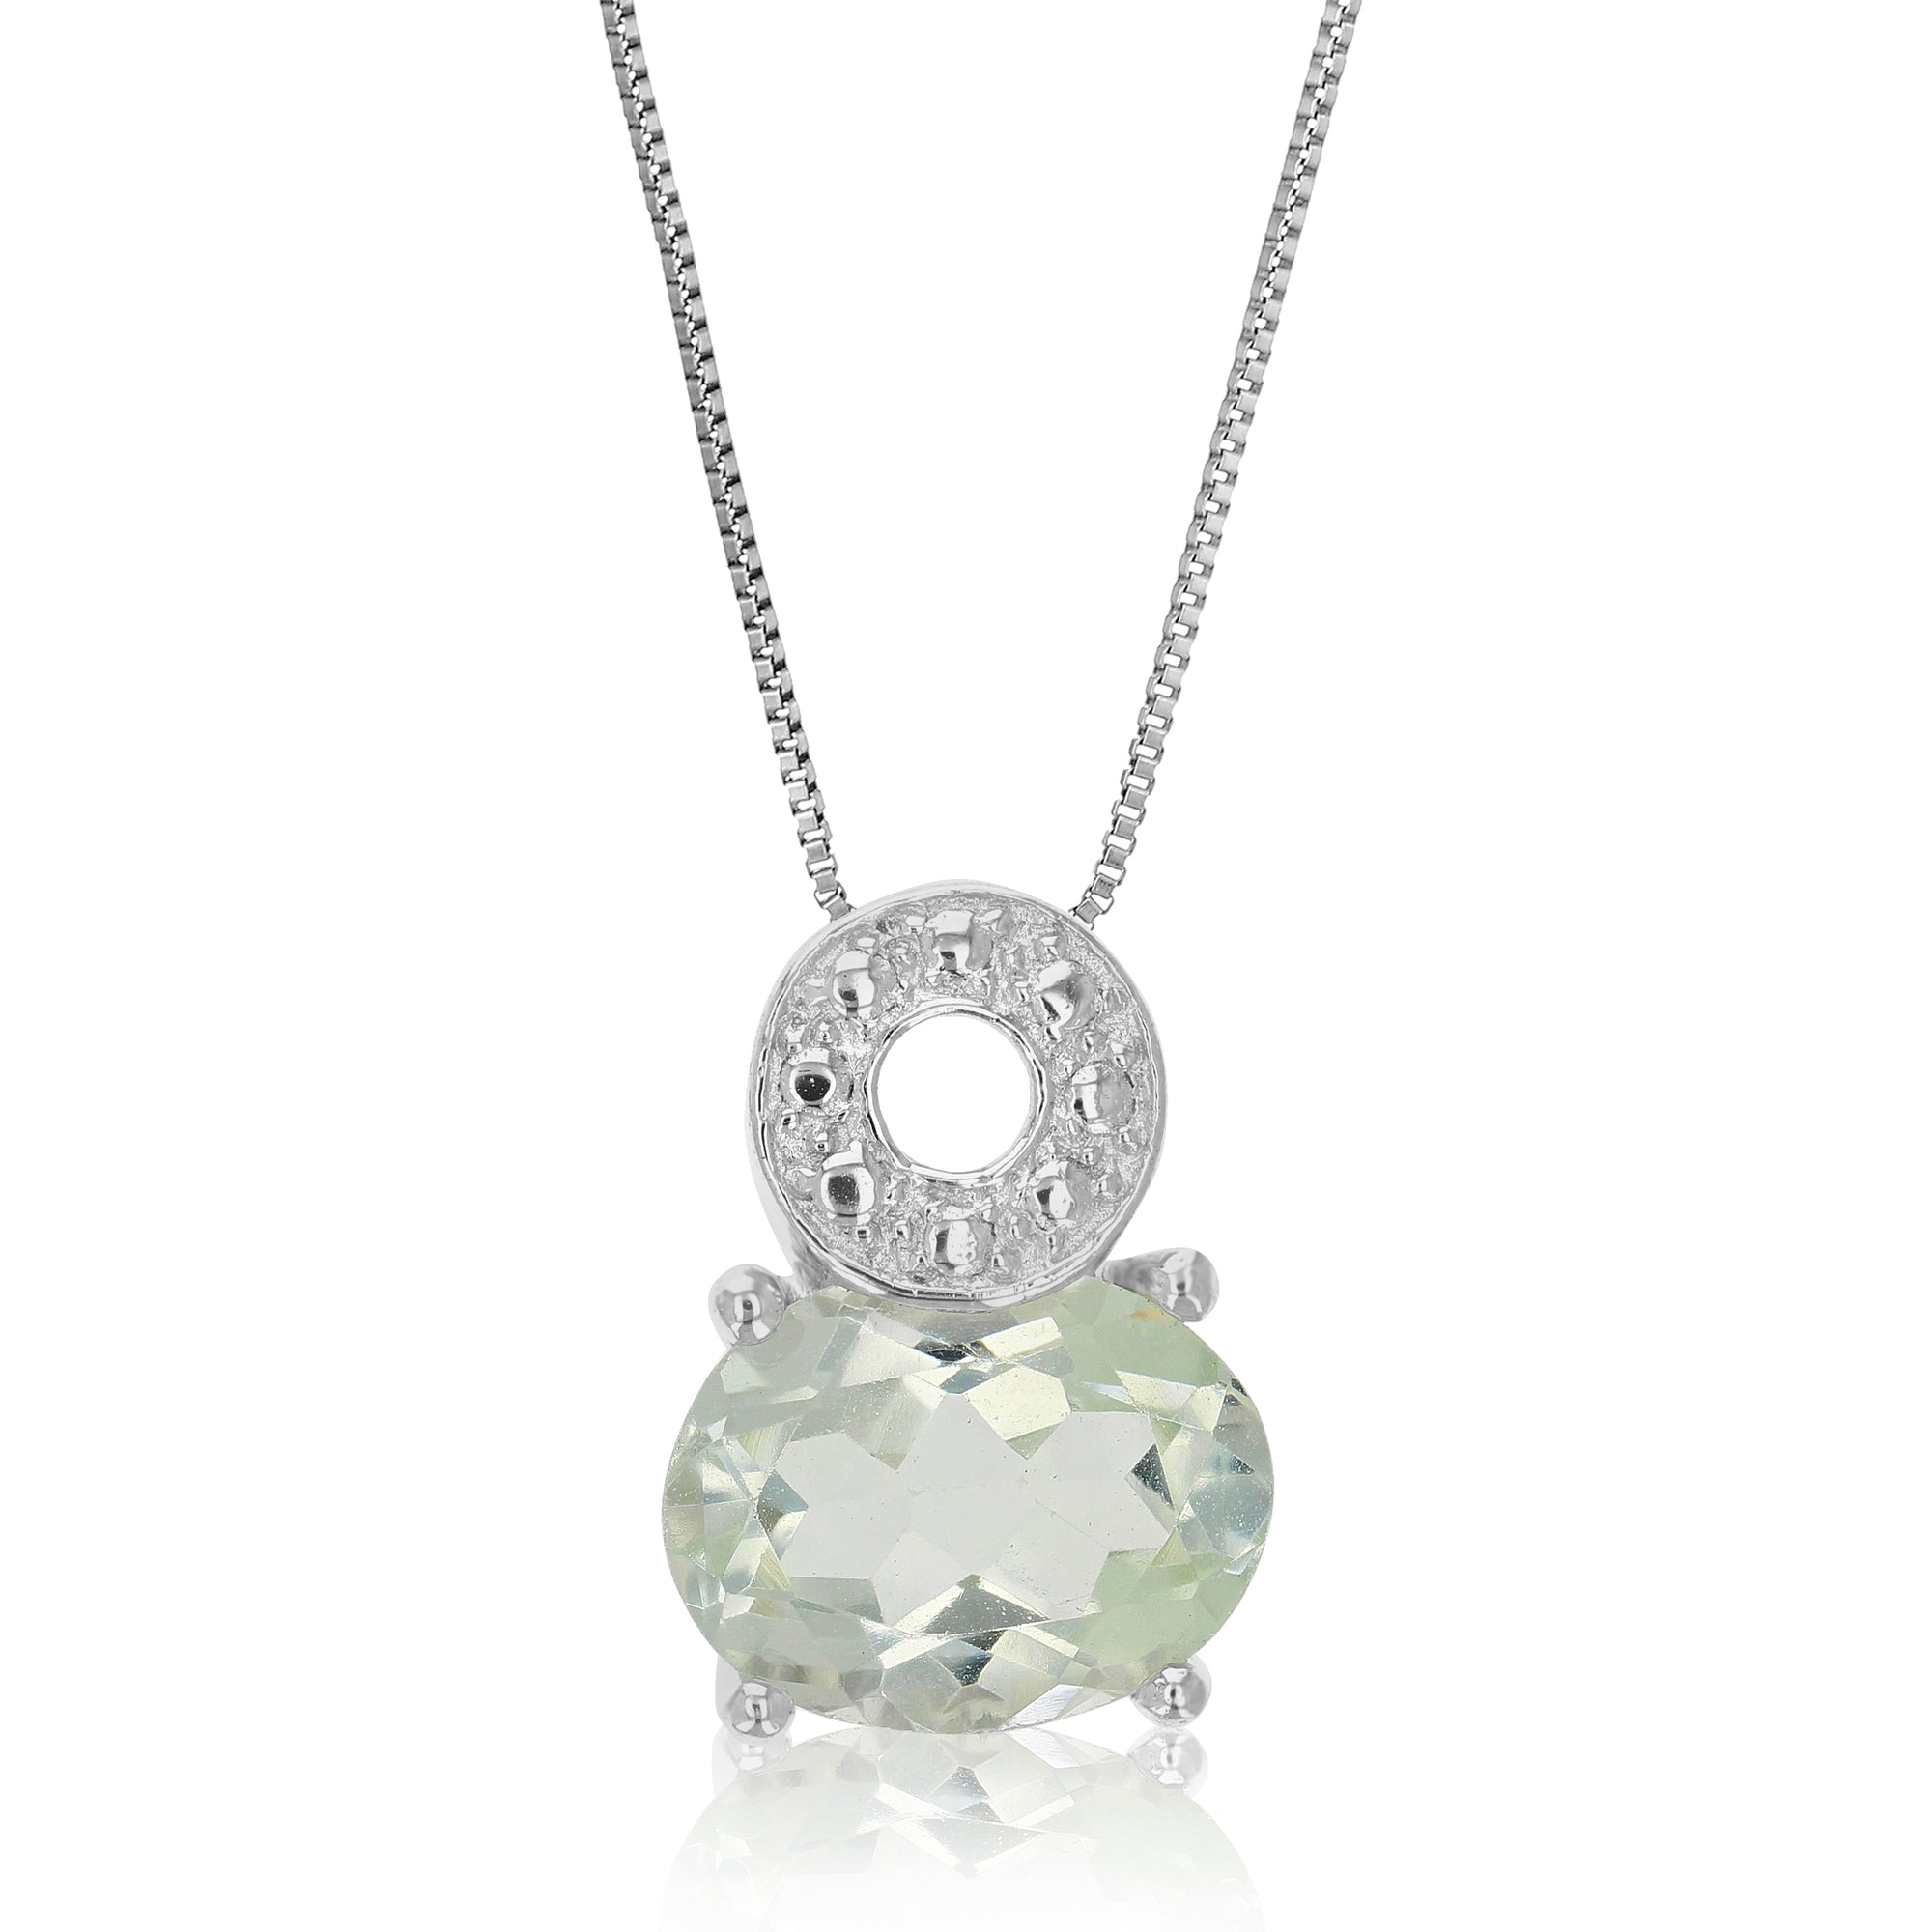 1 cttw Pendant Necklace, Green Amethyst Oval Pendant Necklace for Women in .925 Sterling Silver with Rhodium, 18 Inch Chain, Prong Setting